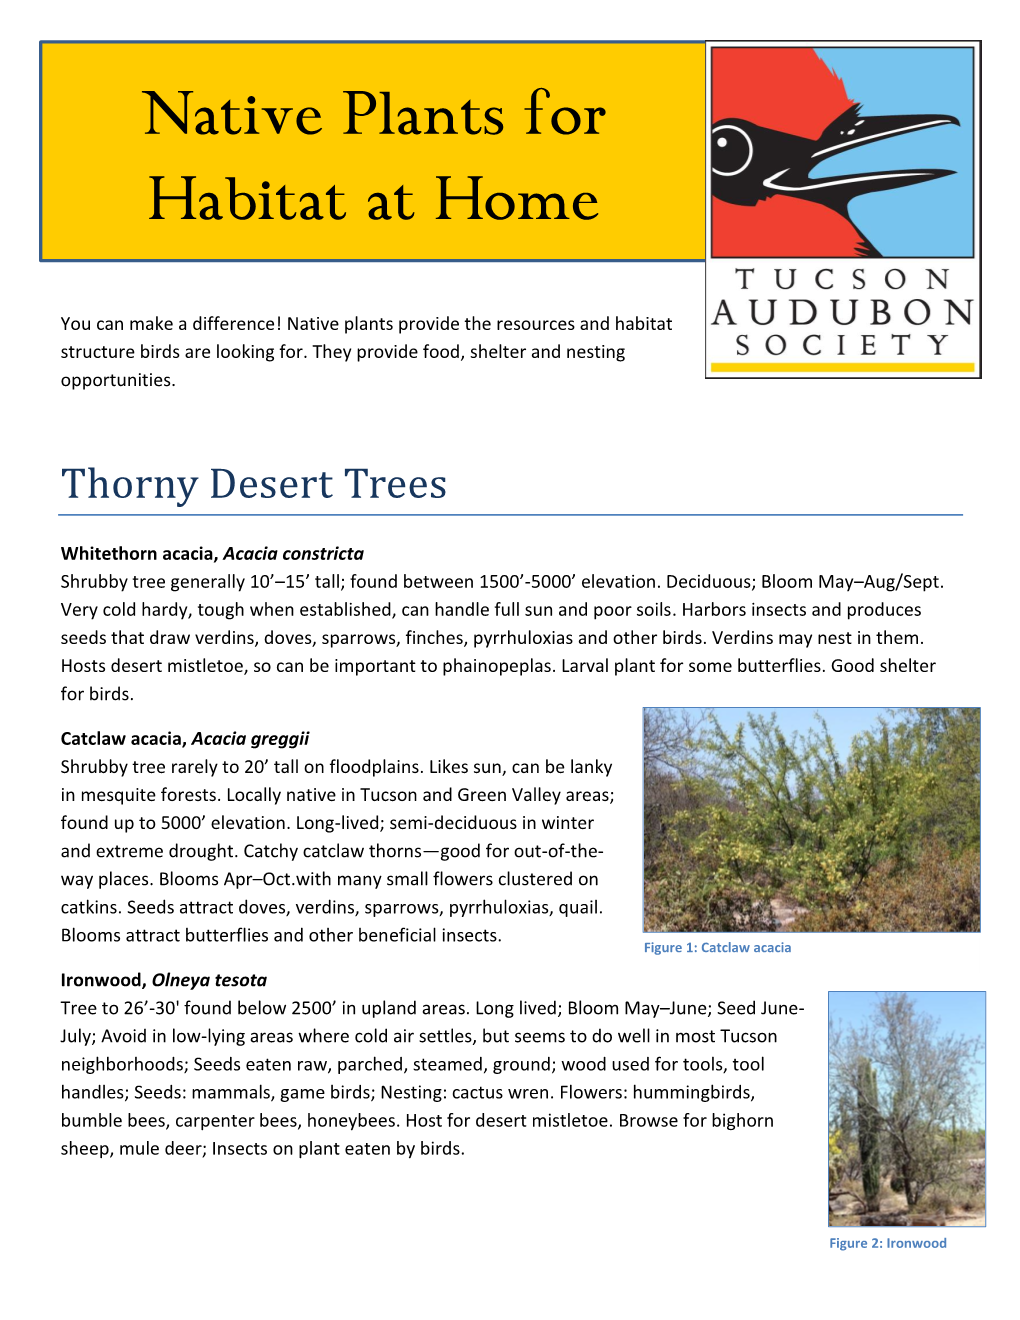 Native Plants for Habitat at Home